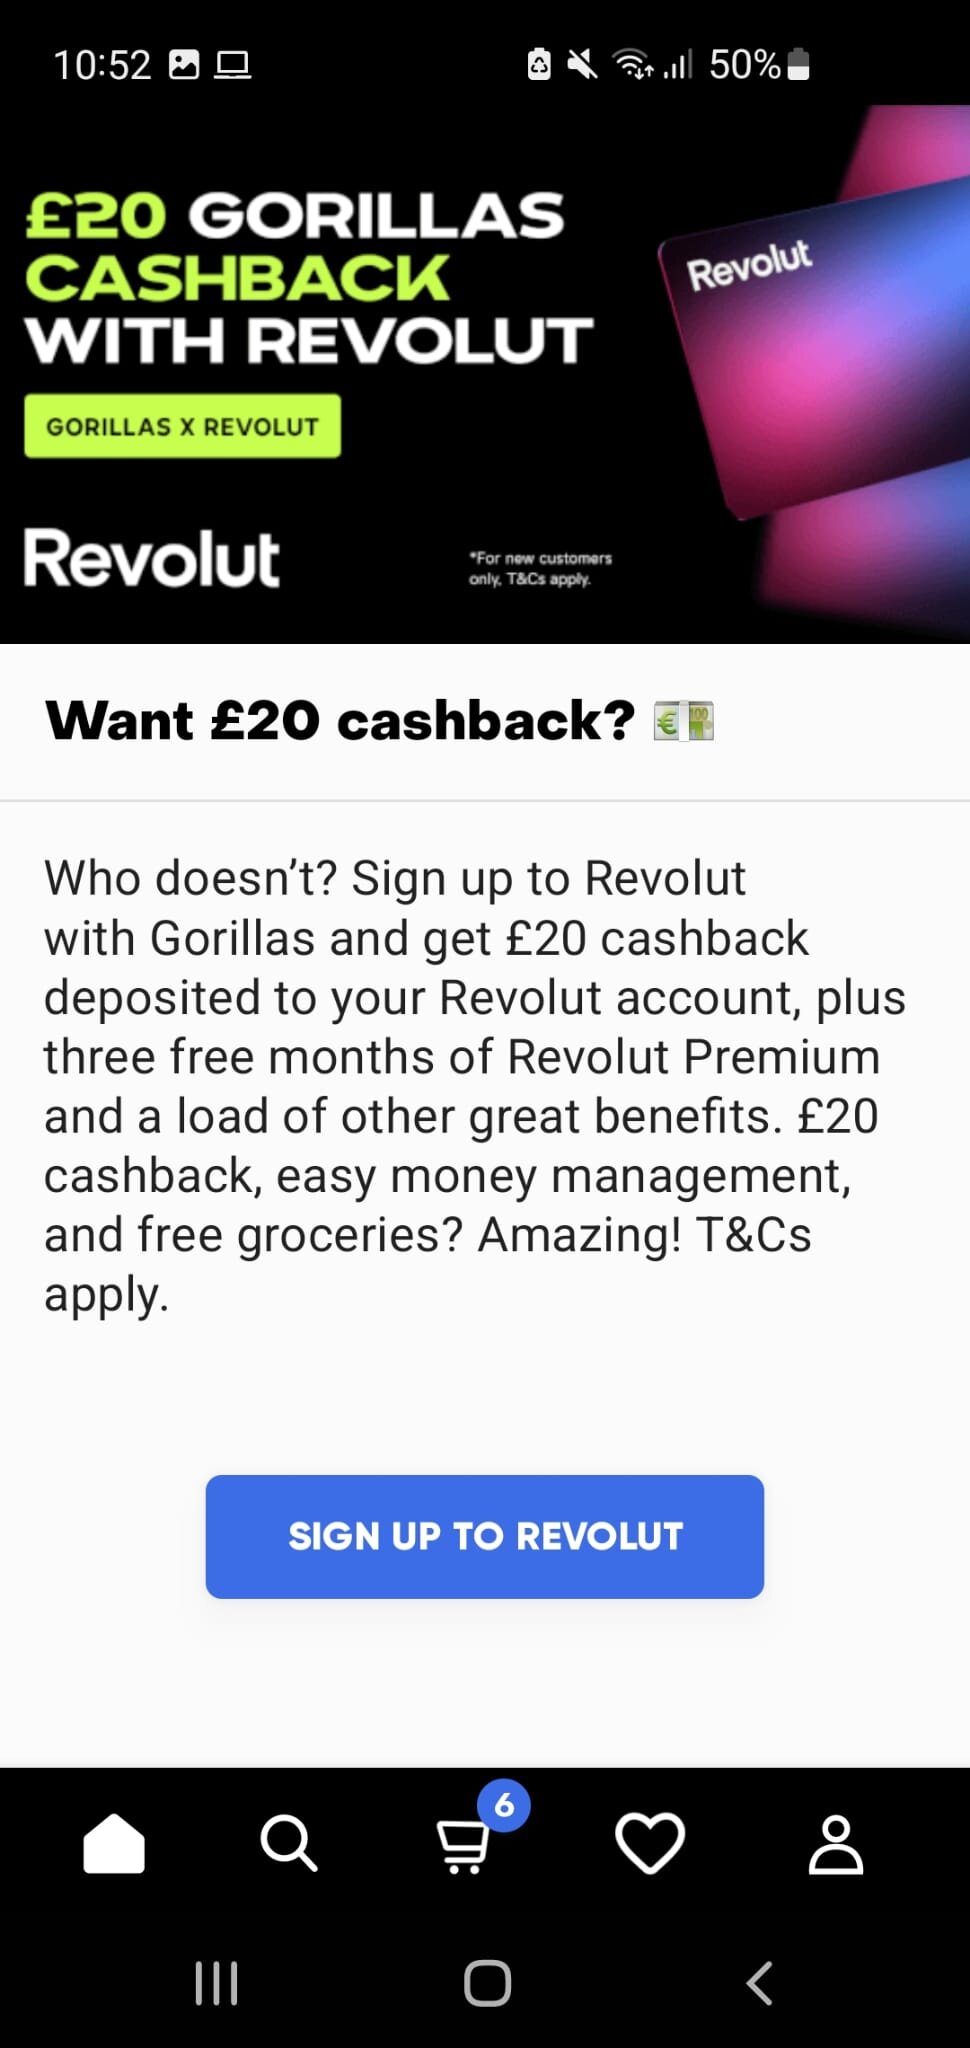 Who doesn't? Sign up to Revolut with Gorillas and get £20 cashback deposited to your Revolut account, plus three free months of Revolut Premium and a load of other great benefits. £20 cashback, easy money management, and free groceries? Amazing! T&Cs apply.